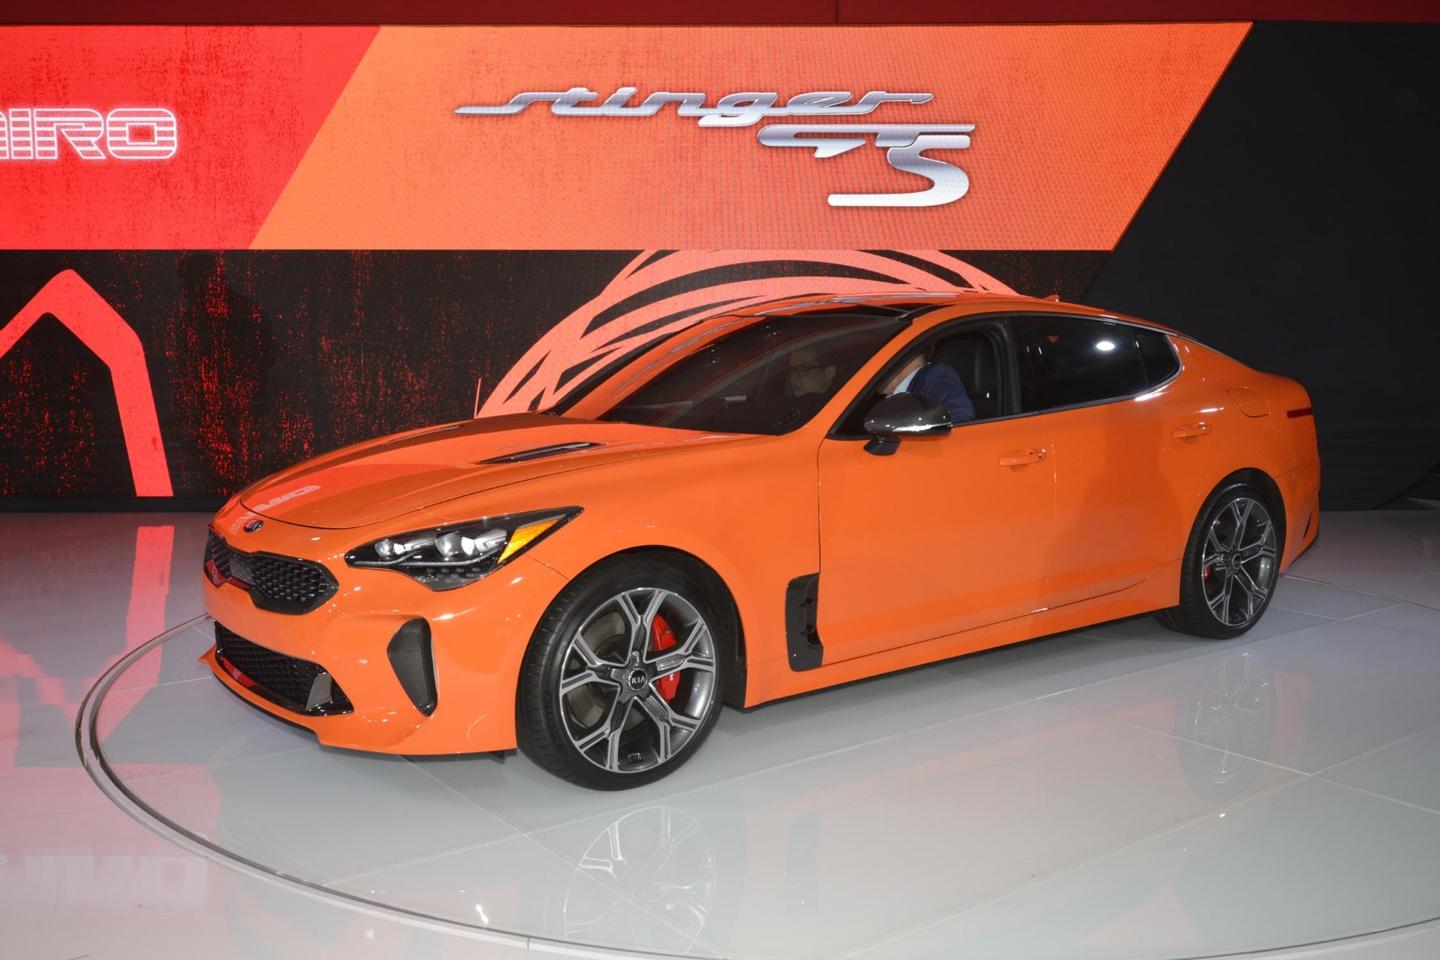 Kia unveils the special-edition Stinger GTS with driftable all-wheel drive